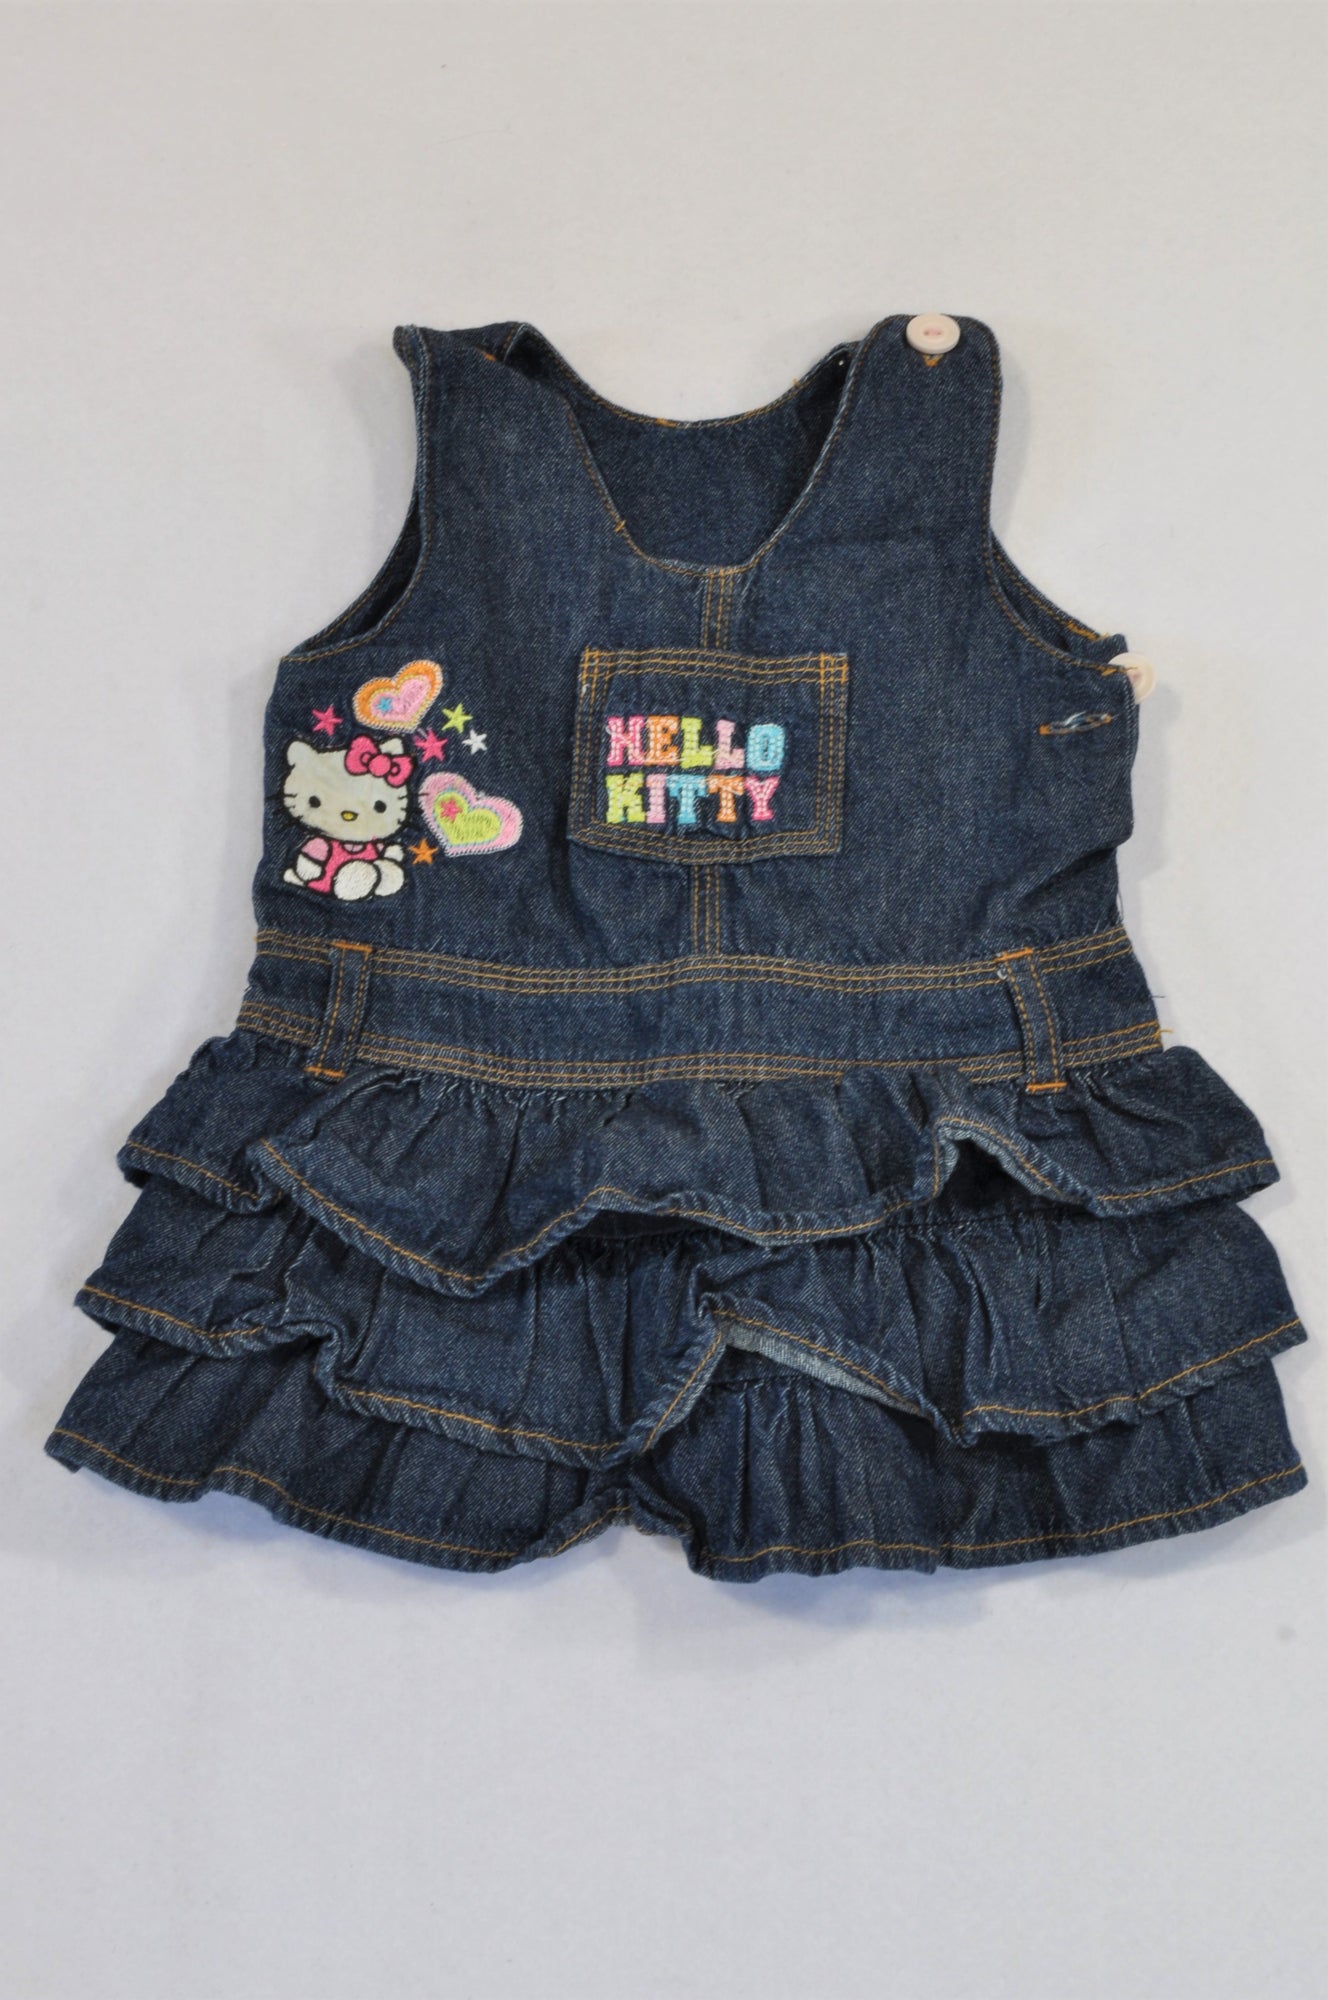 edgars baby girl clothes